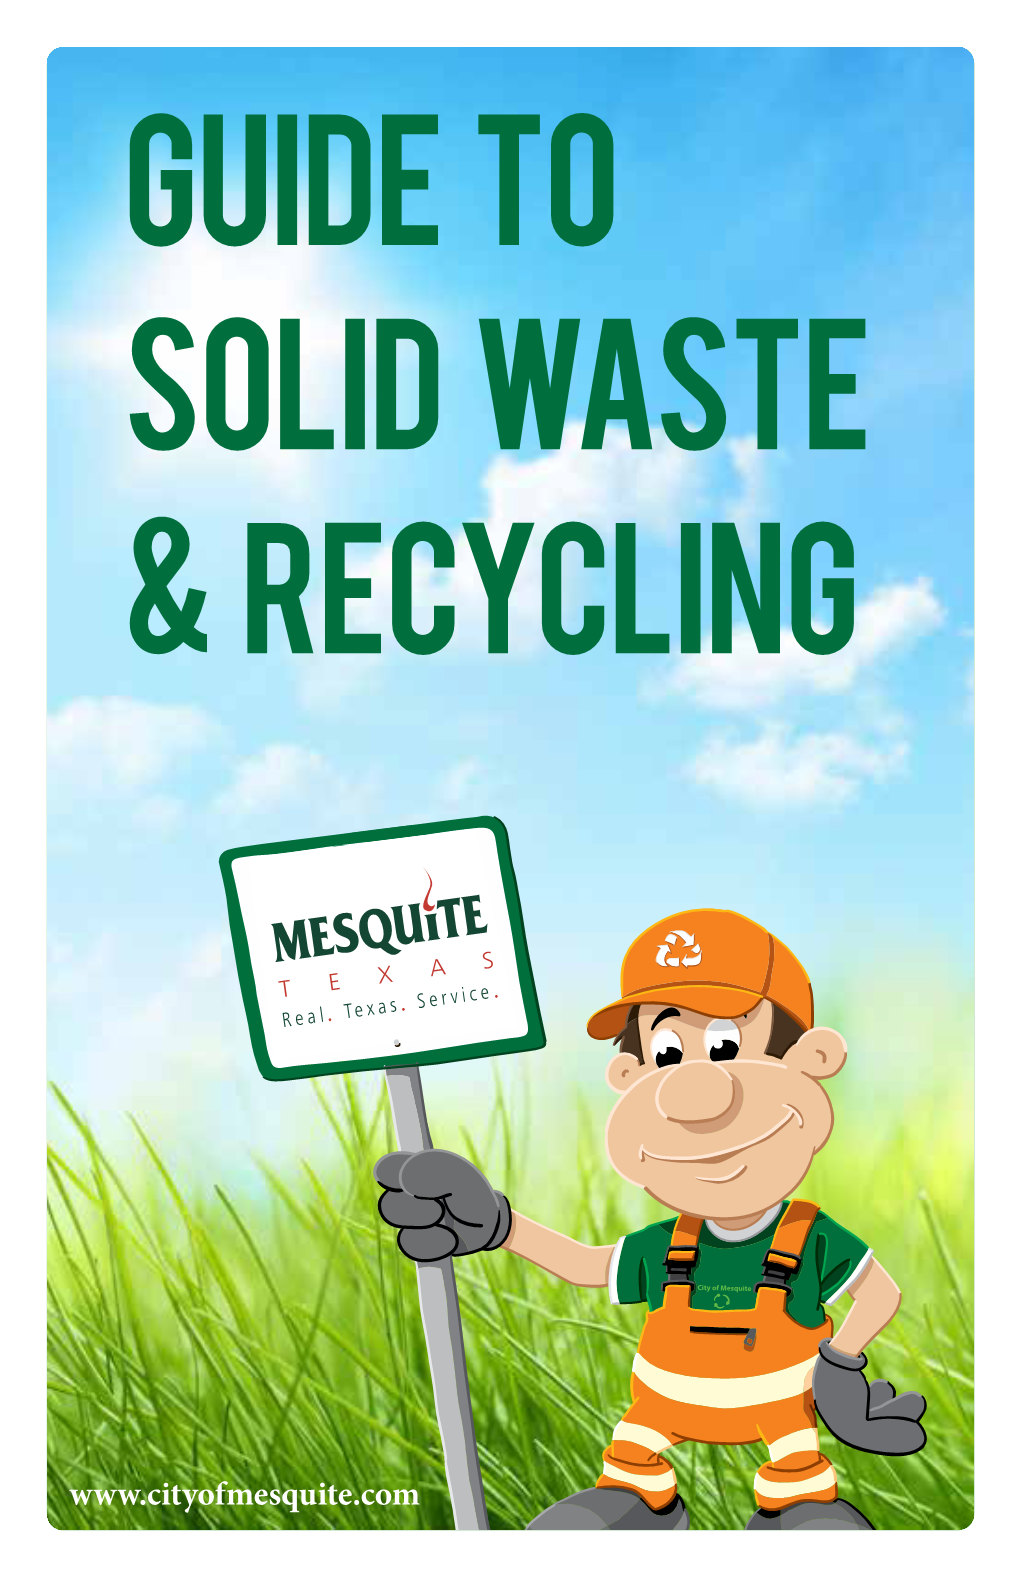 Guide to Solid Waste & Recycling